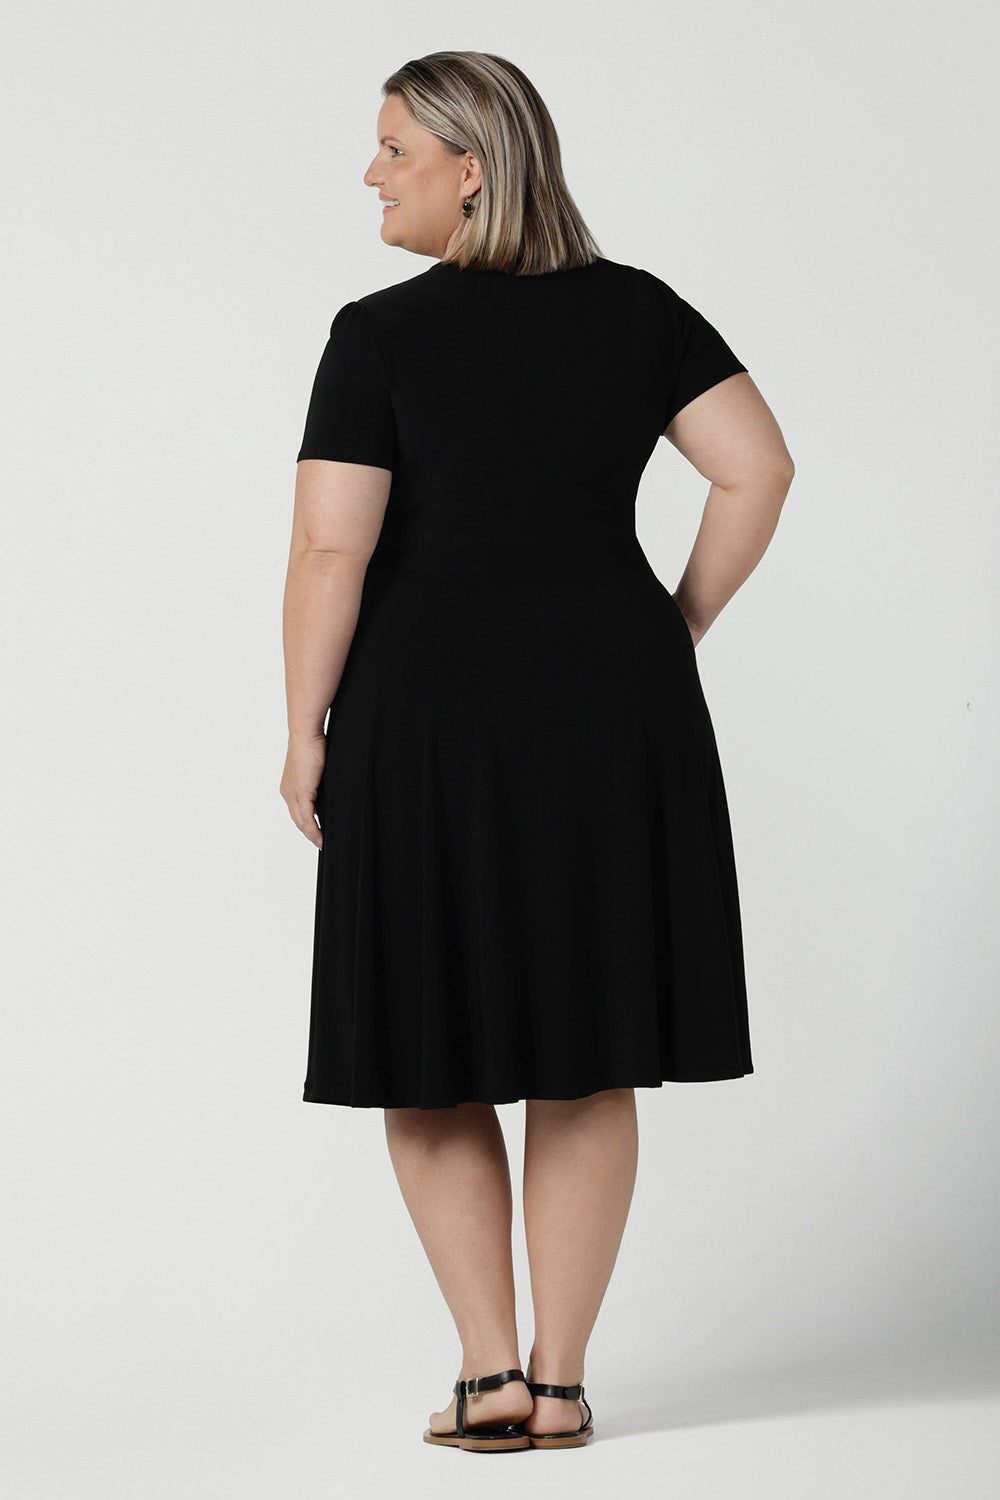 Back view of a size inclusive fashion for women.Curvy size 16 model wears black jersey dress in a fixed wrap style midi length. Comfortable corporate dress from work to weekend. Made in Australia for women size 8 - 24.